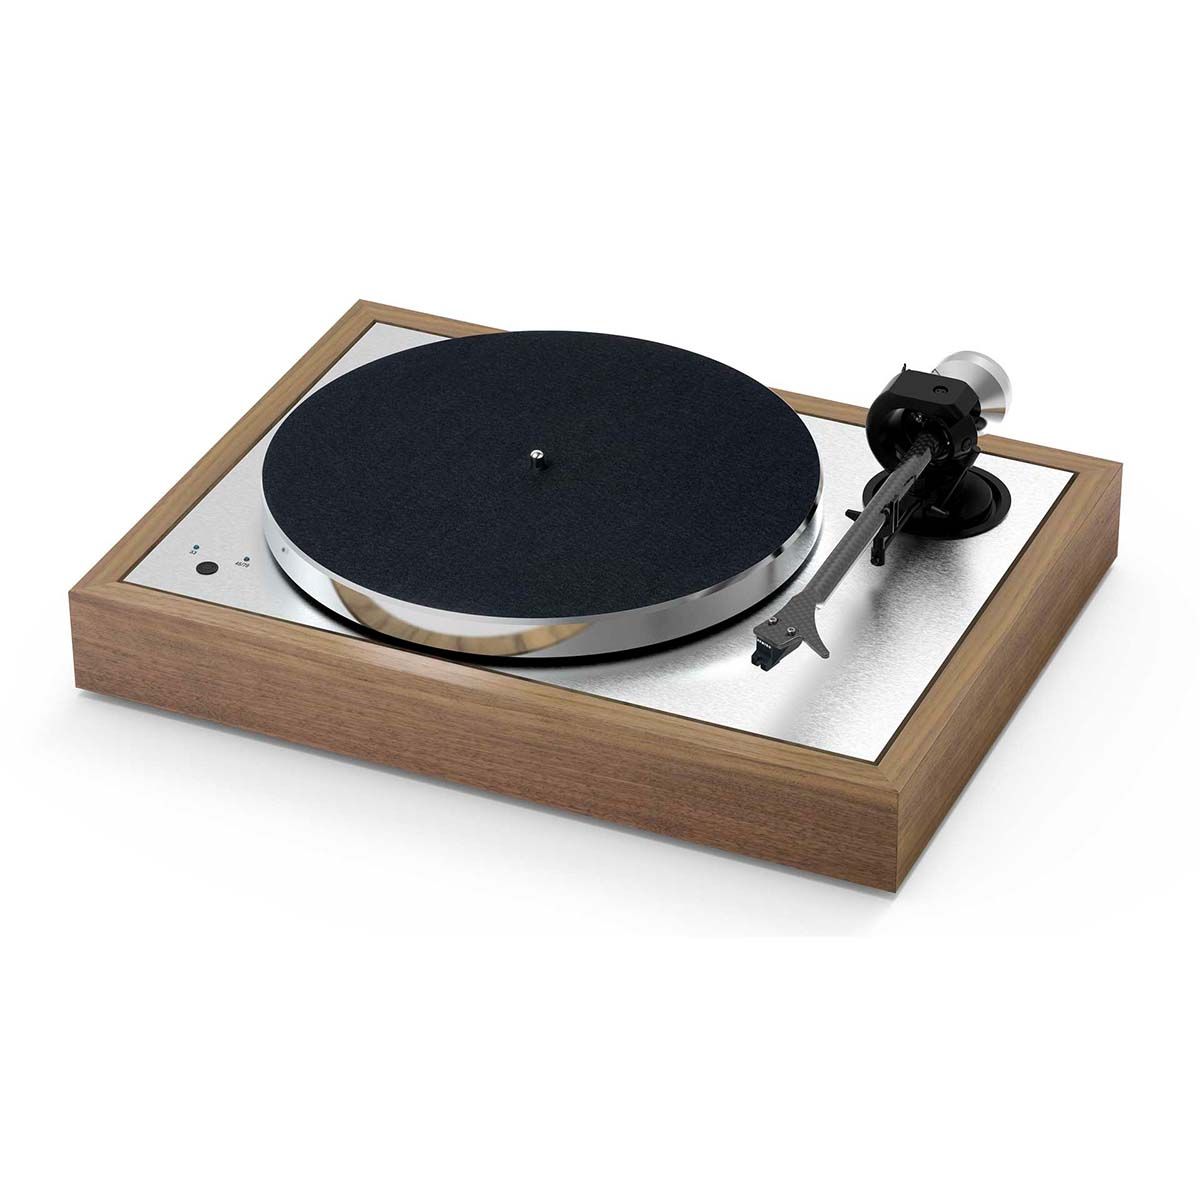 Pro-ject The Classic EVO Turntable - Walnut - angled front view